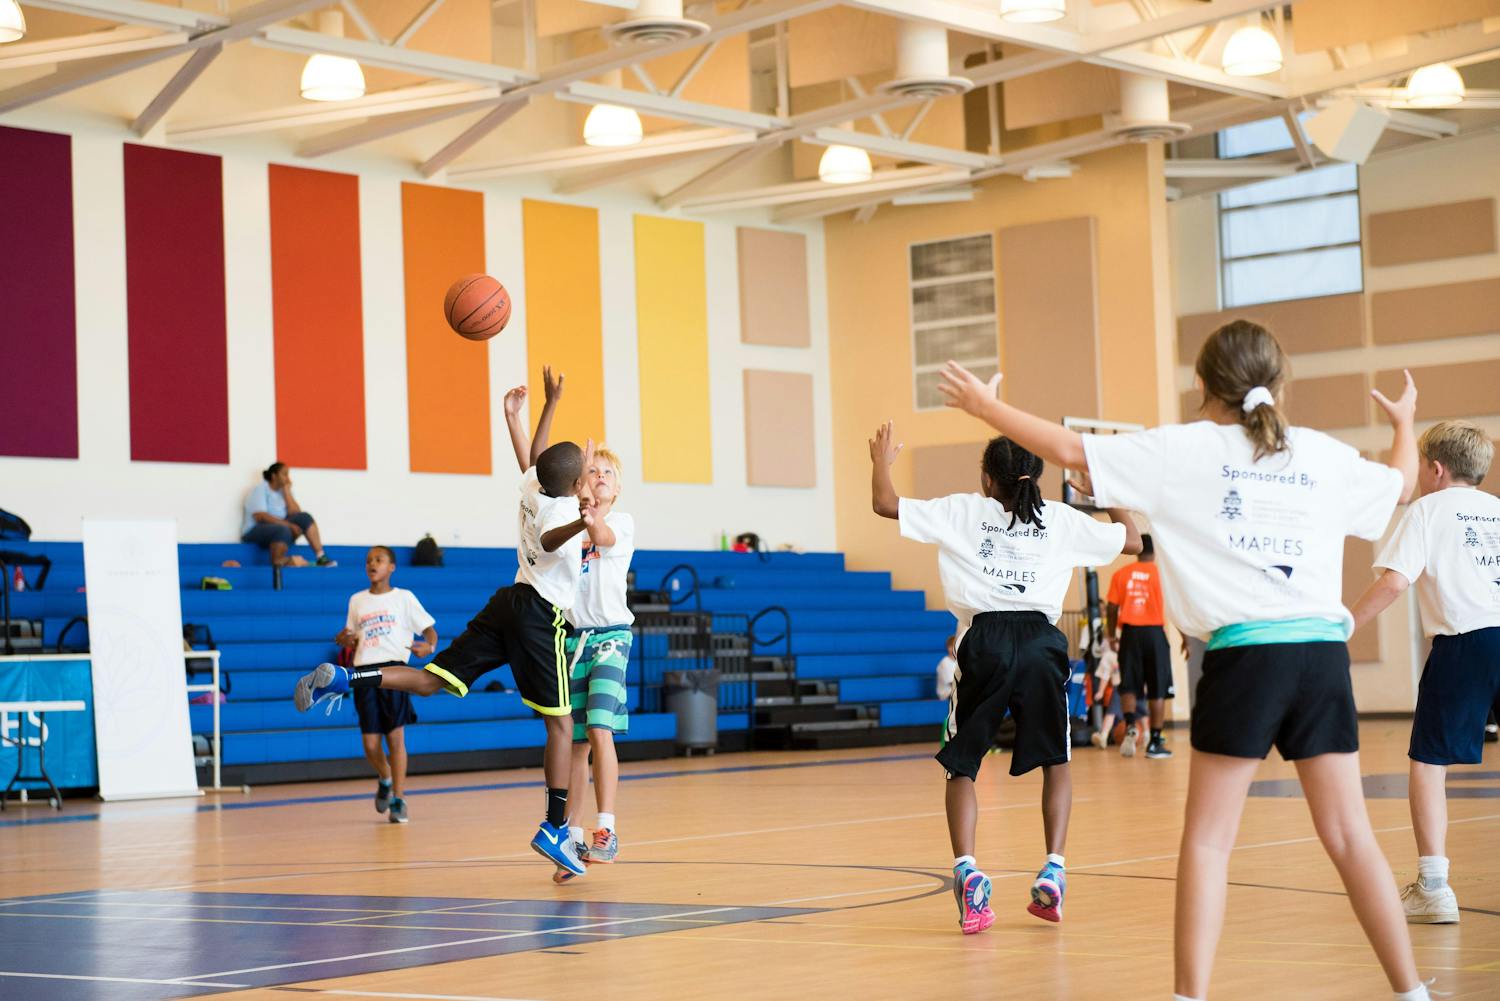 Kids playing basketball at an indoor sports facility